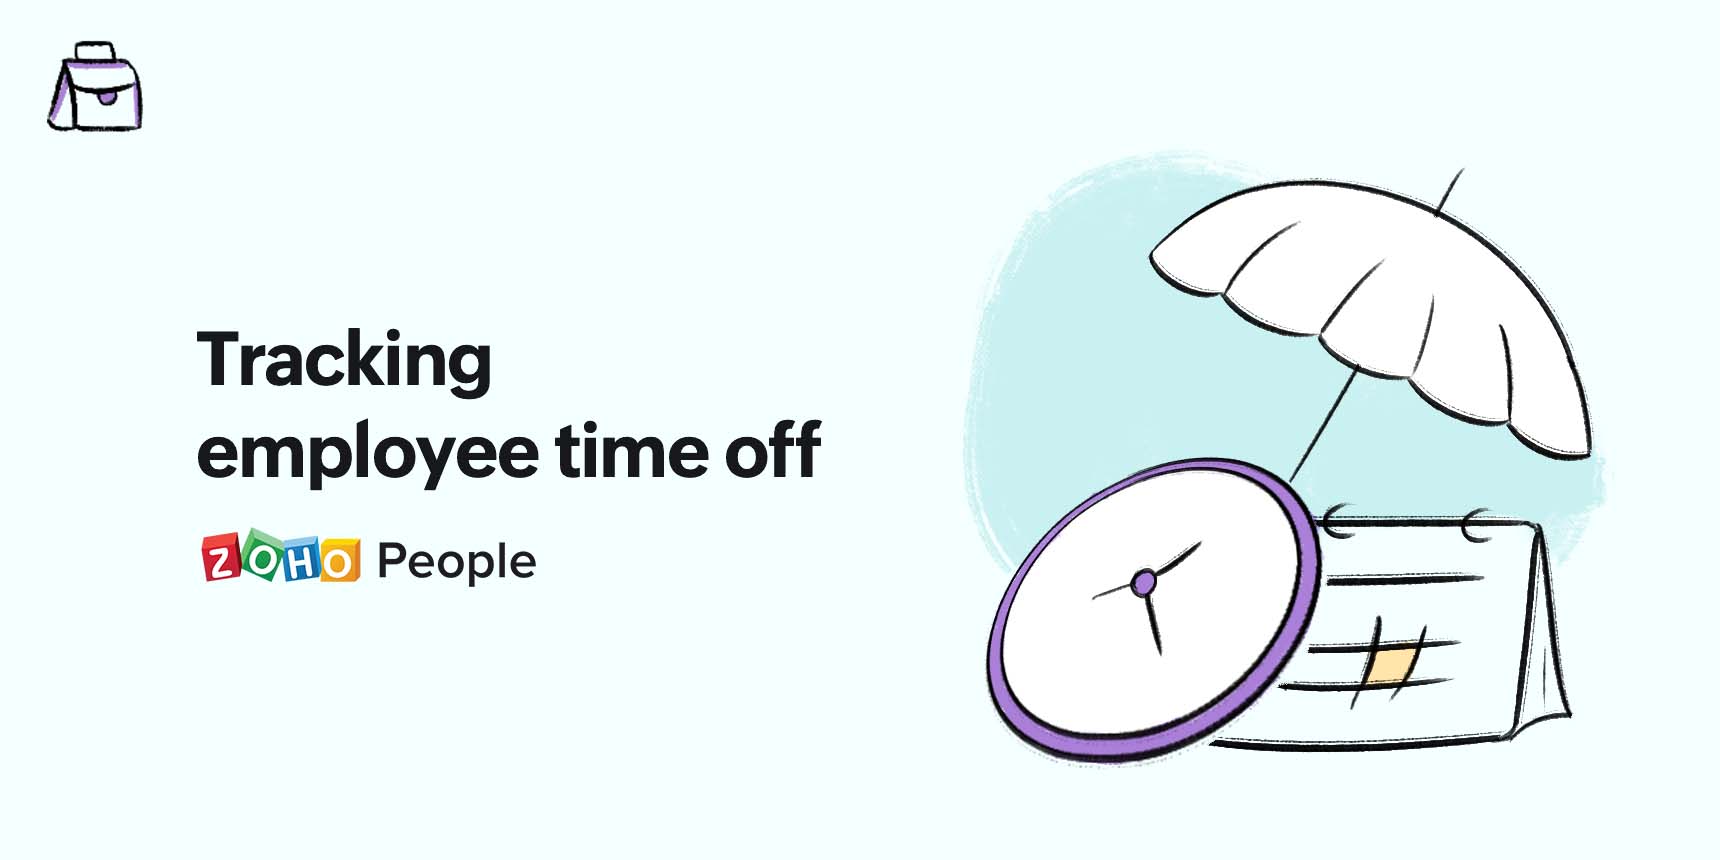 4 different ways to manage Employee time off